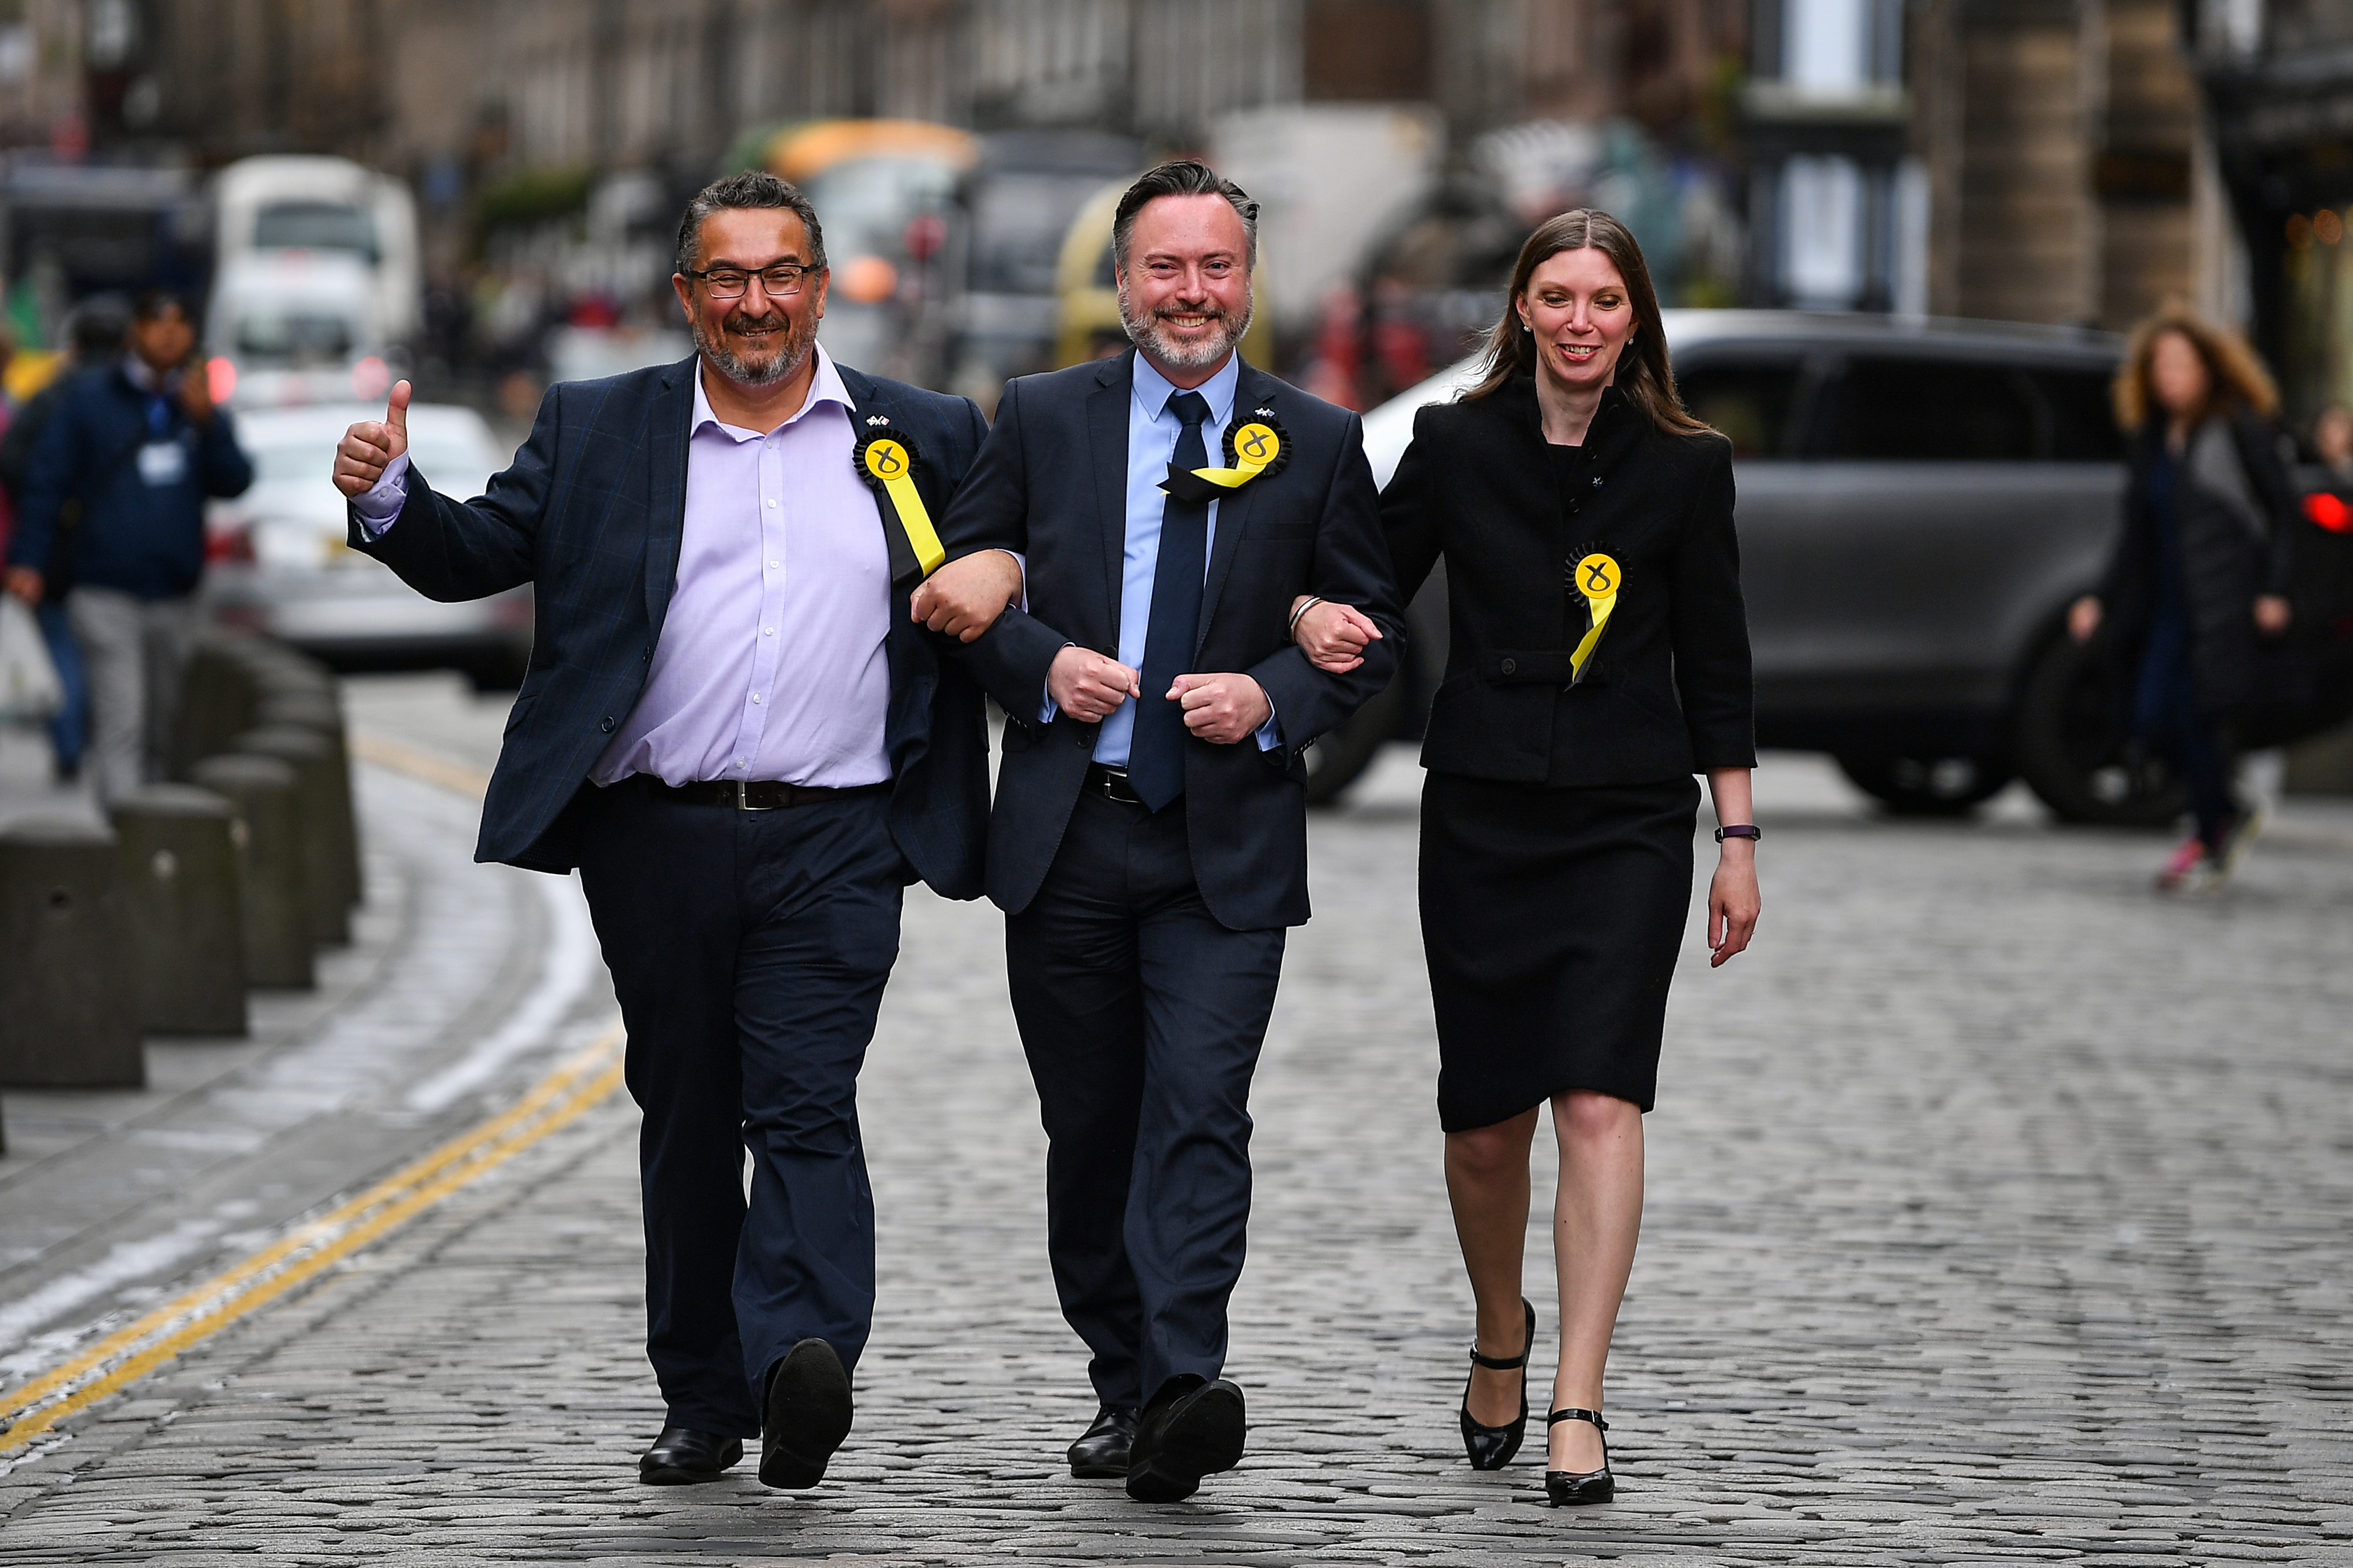 The newly elected SNP European Parliament MEPs Christain Allard, Alyn Smith, and Aileen McLeod.